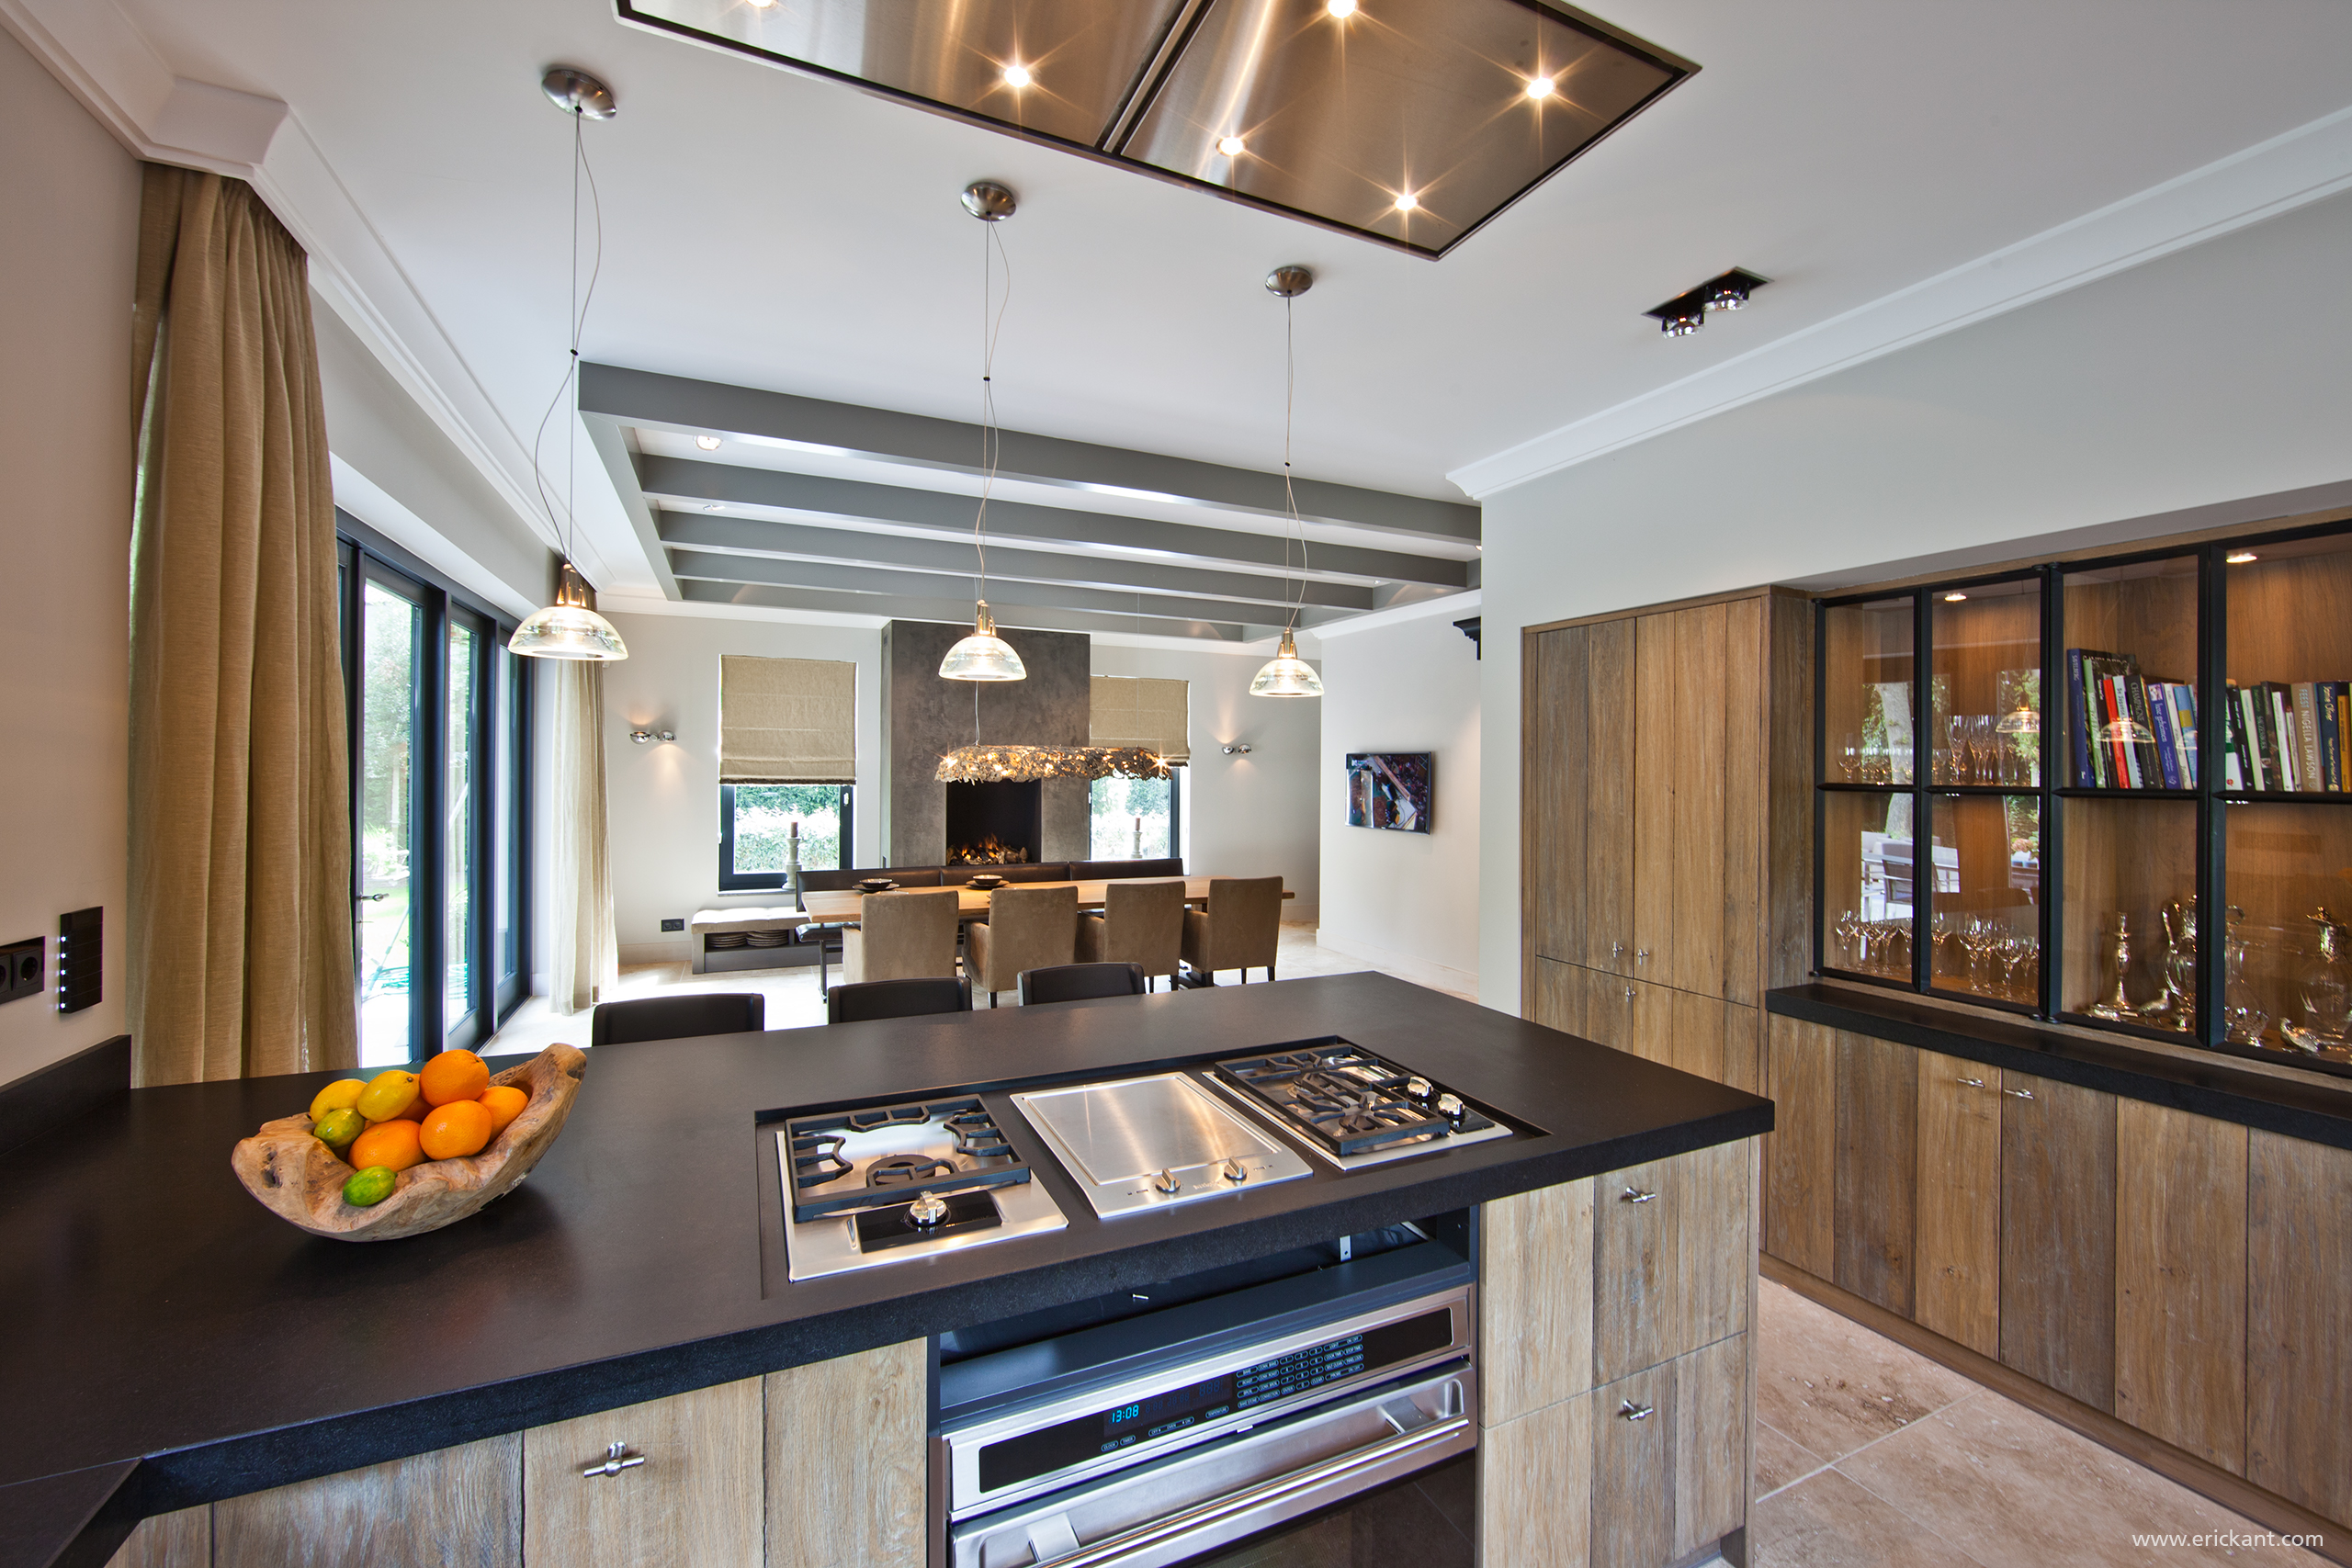 New Classic Villa-kitchen and dining-ERIC KANT.jpg